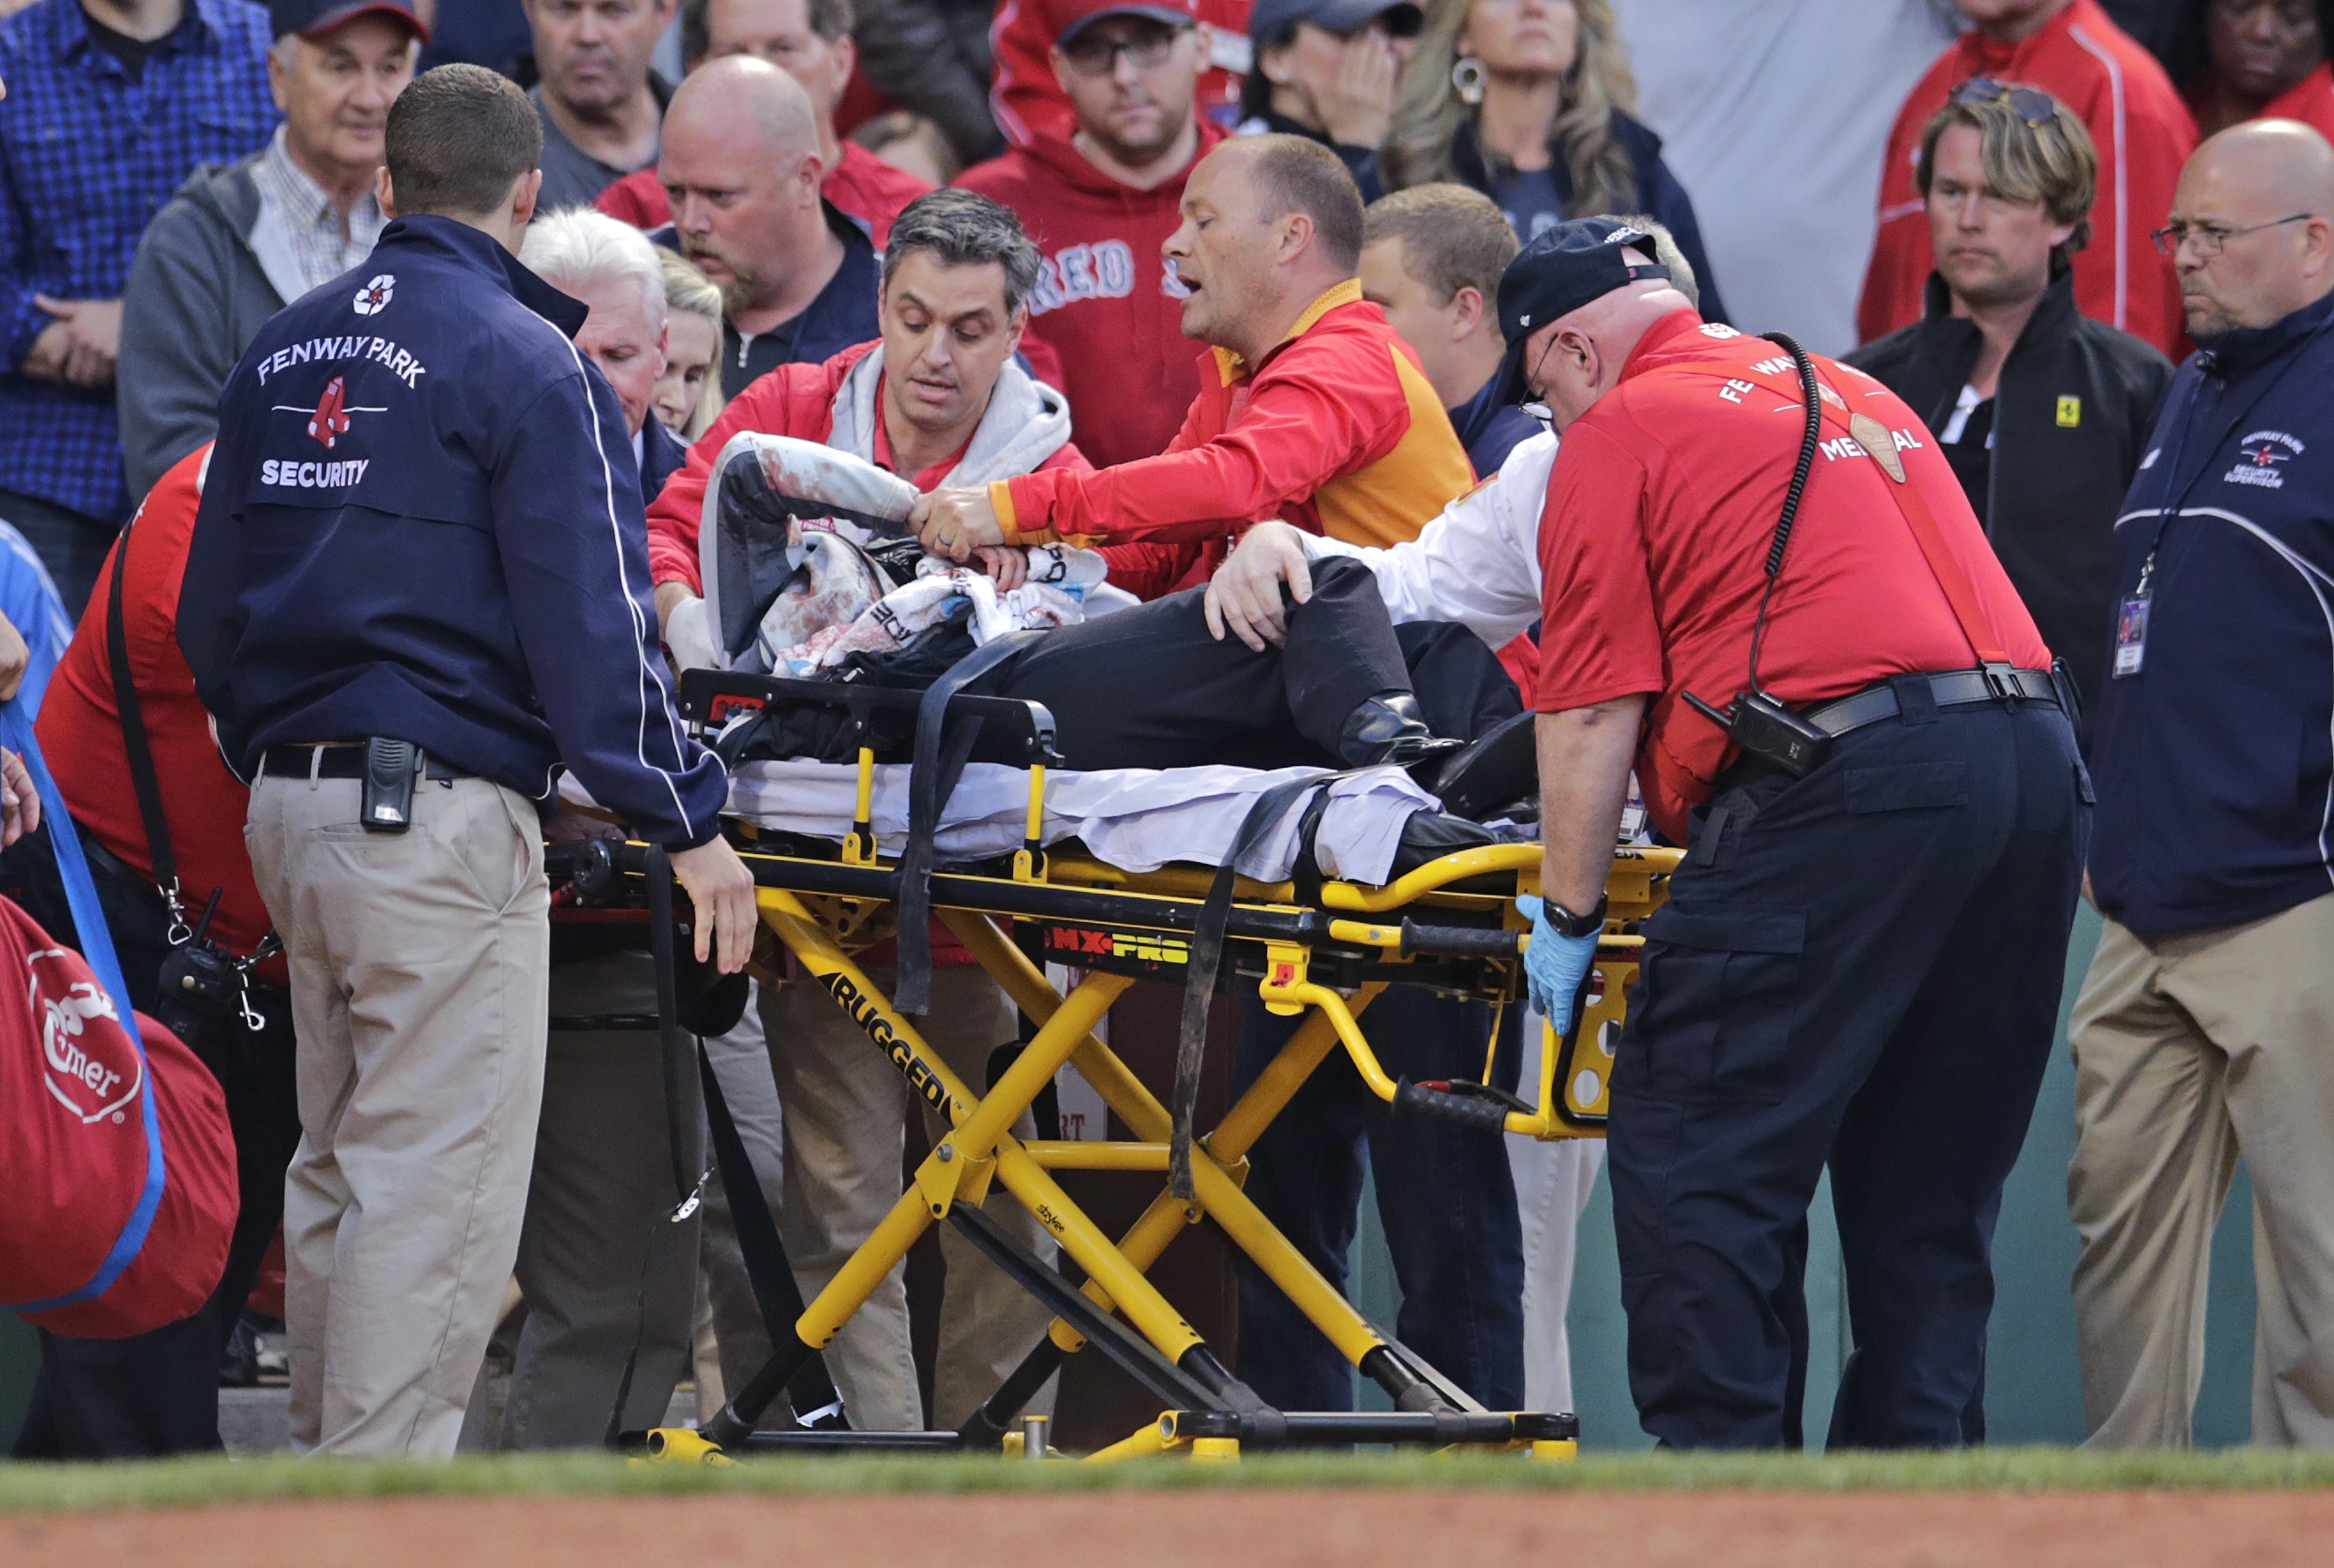 A fan, who was accidentally hit in the head with a broken bat by Oakland Athletics' Brett Lawrie, is helped from the stands during a baseball game against the Boston Red Sox at Fenway Park in Boston, Friday, June 5, 2015.  The game was stopped while they wheeled her down the first base line. (AP Photo/Charles Krupa)